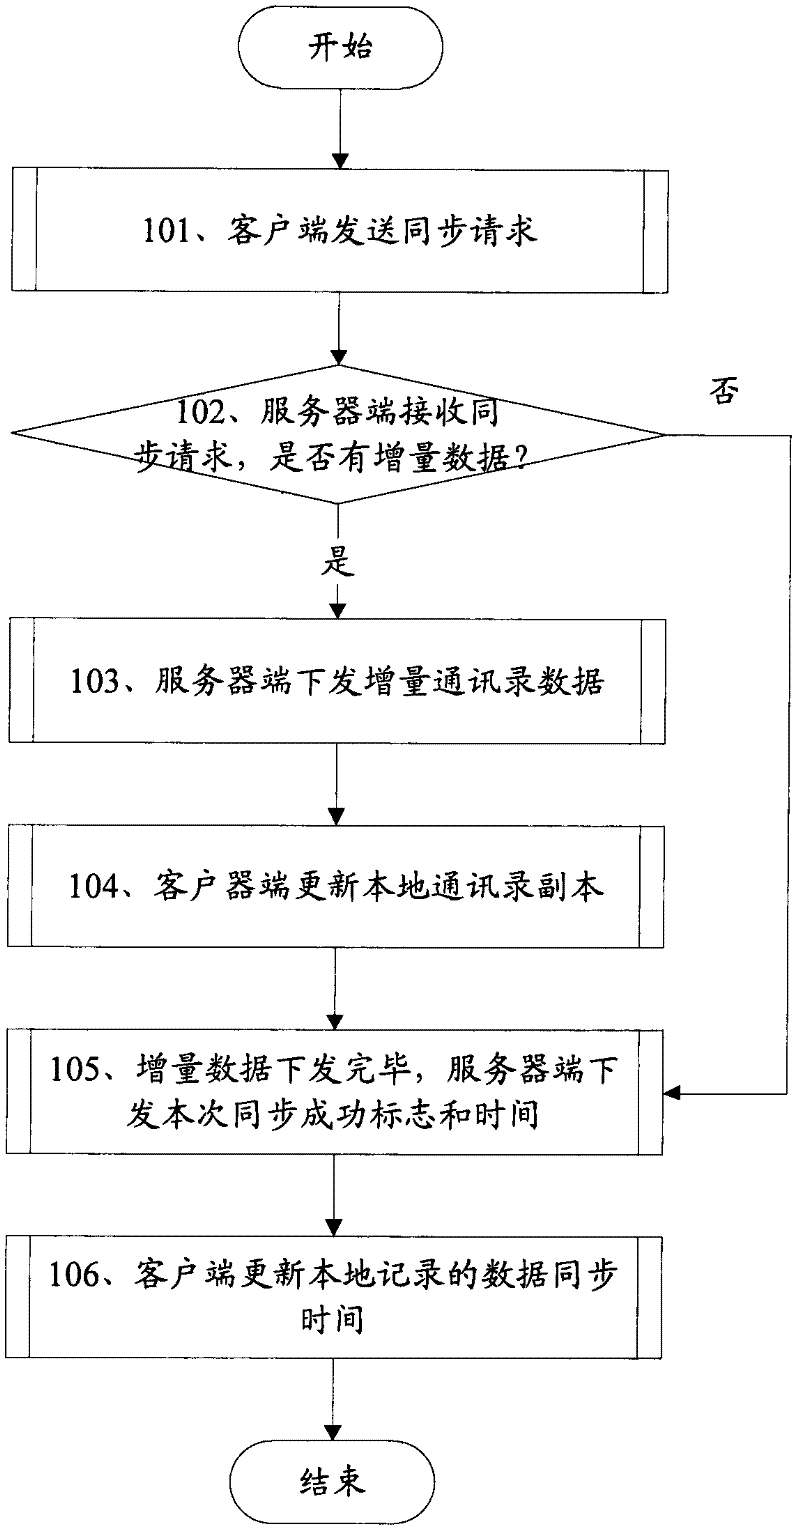 Synchronous method of enterprise organization structure address book and system thereof